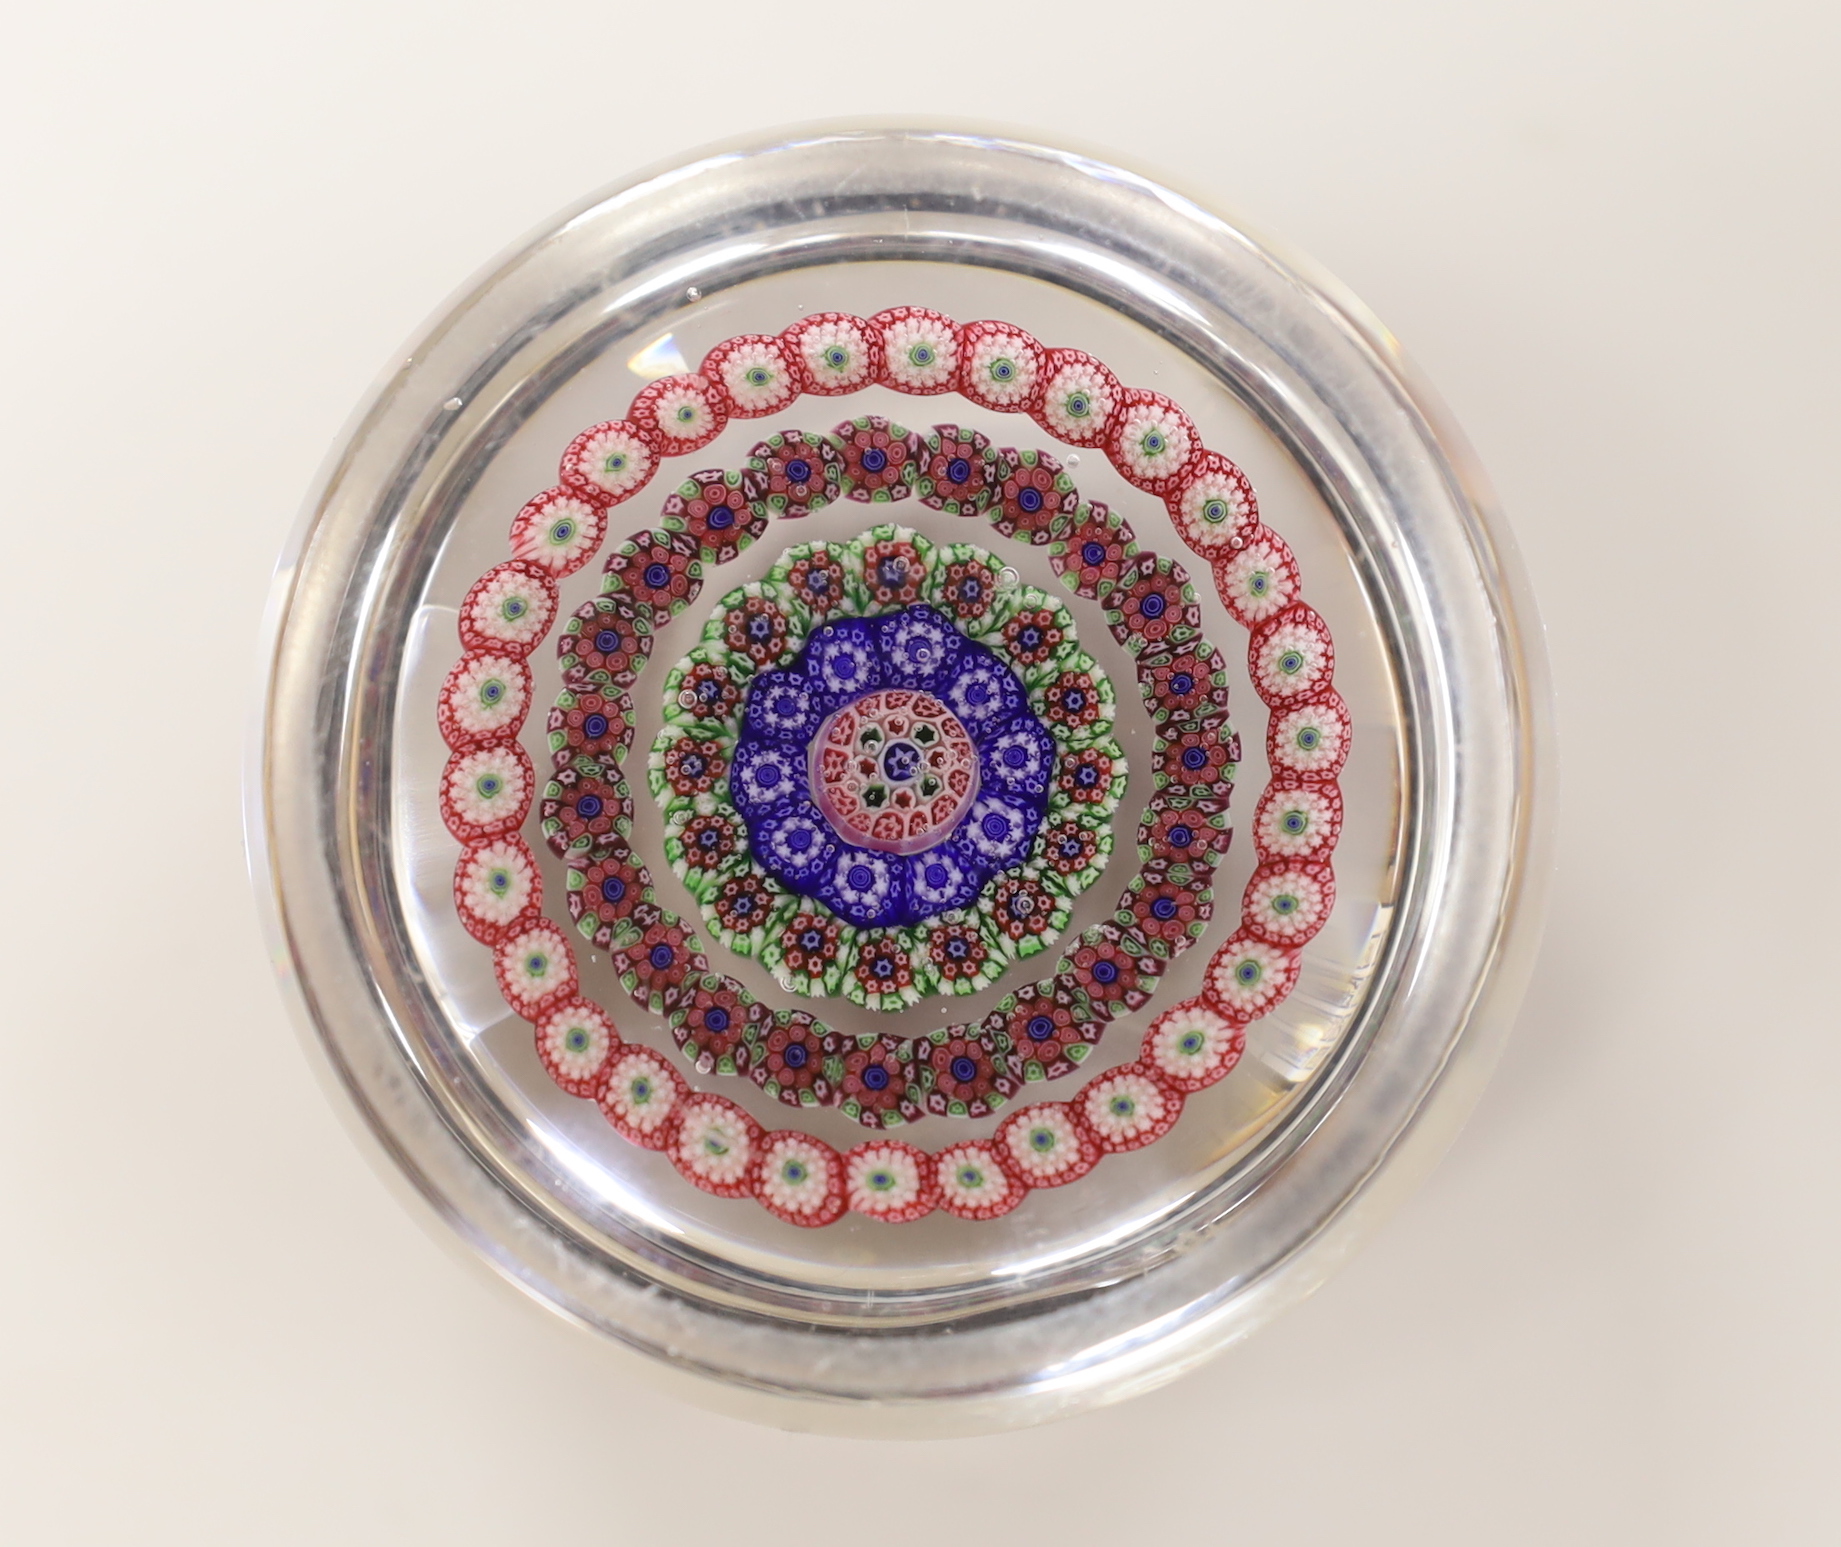 A Baccarat concentric millefleur cane paperweight, 6cm diameter